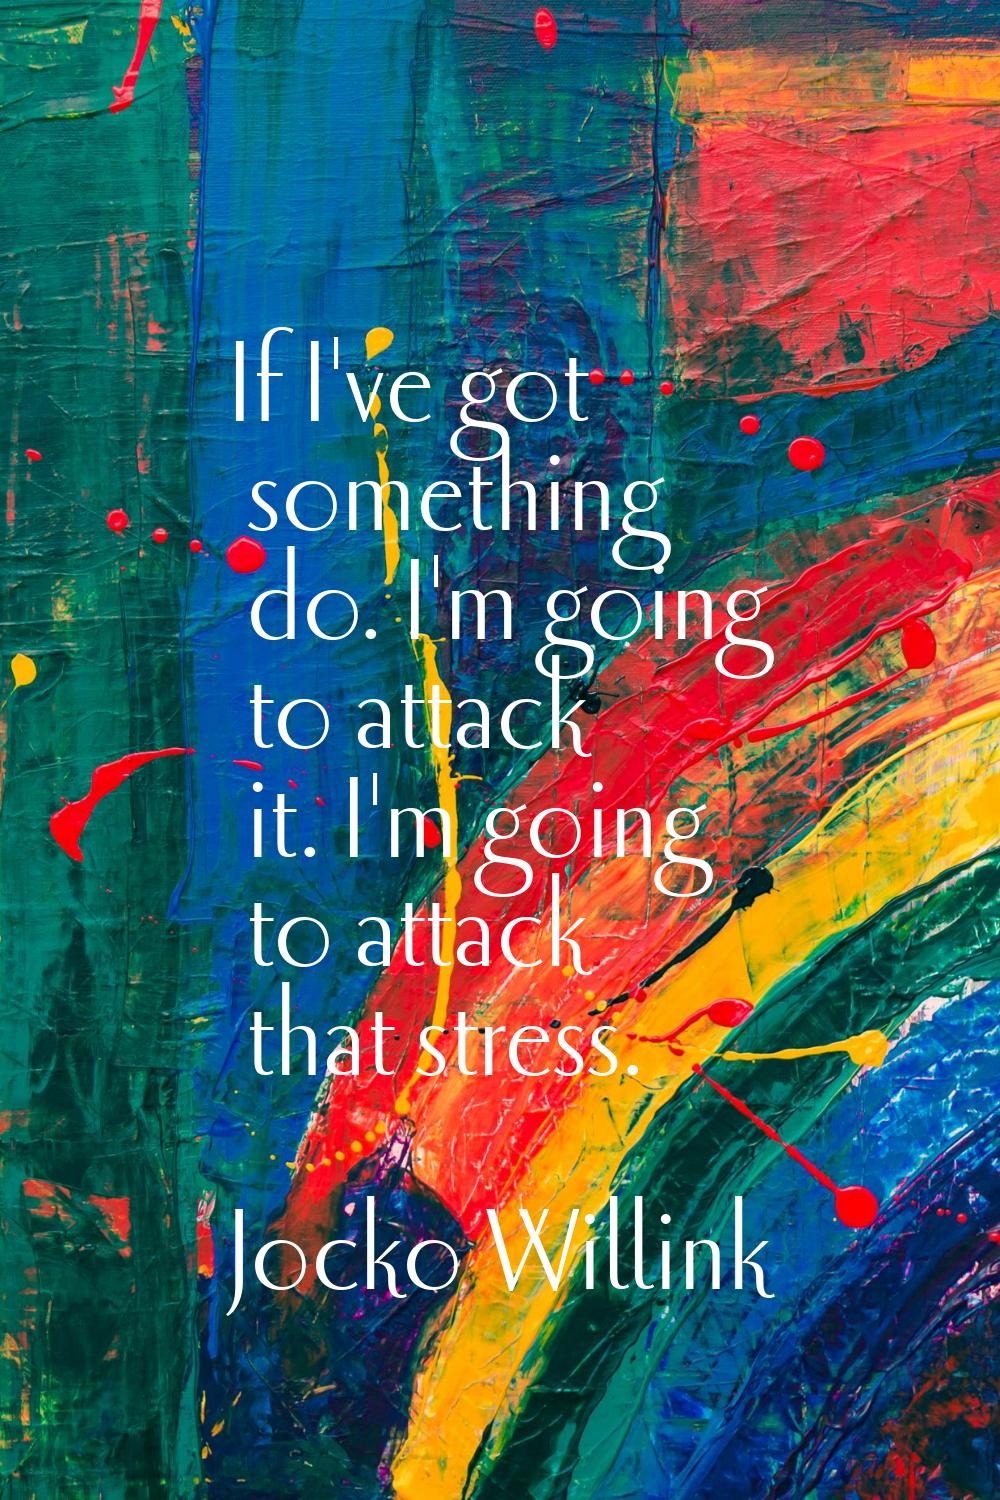 If I've got something do. I'm going to attack it. I'm going to attack that stress.